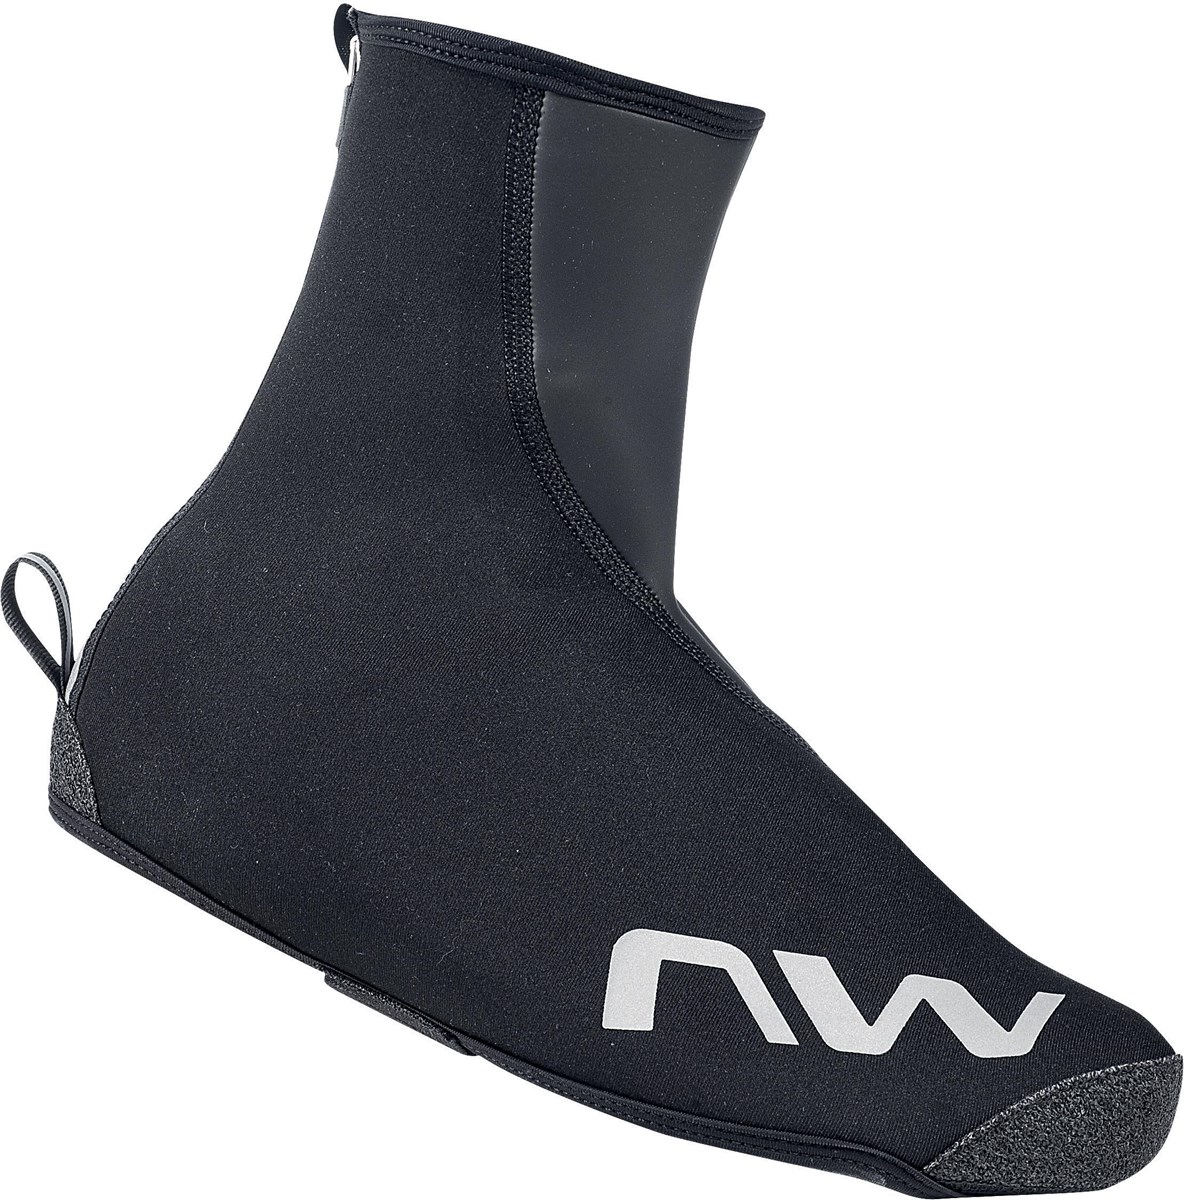 Northwave Active Scuba Shoecovers product image